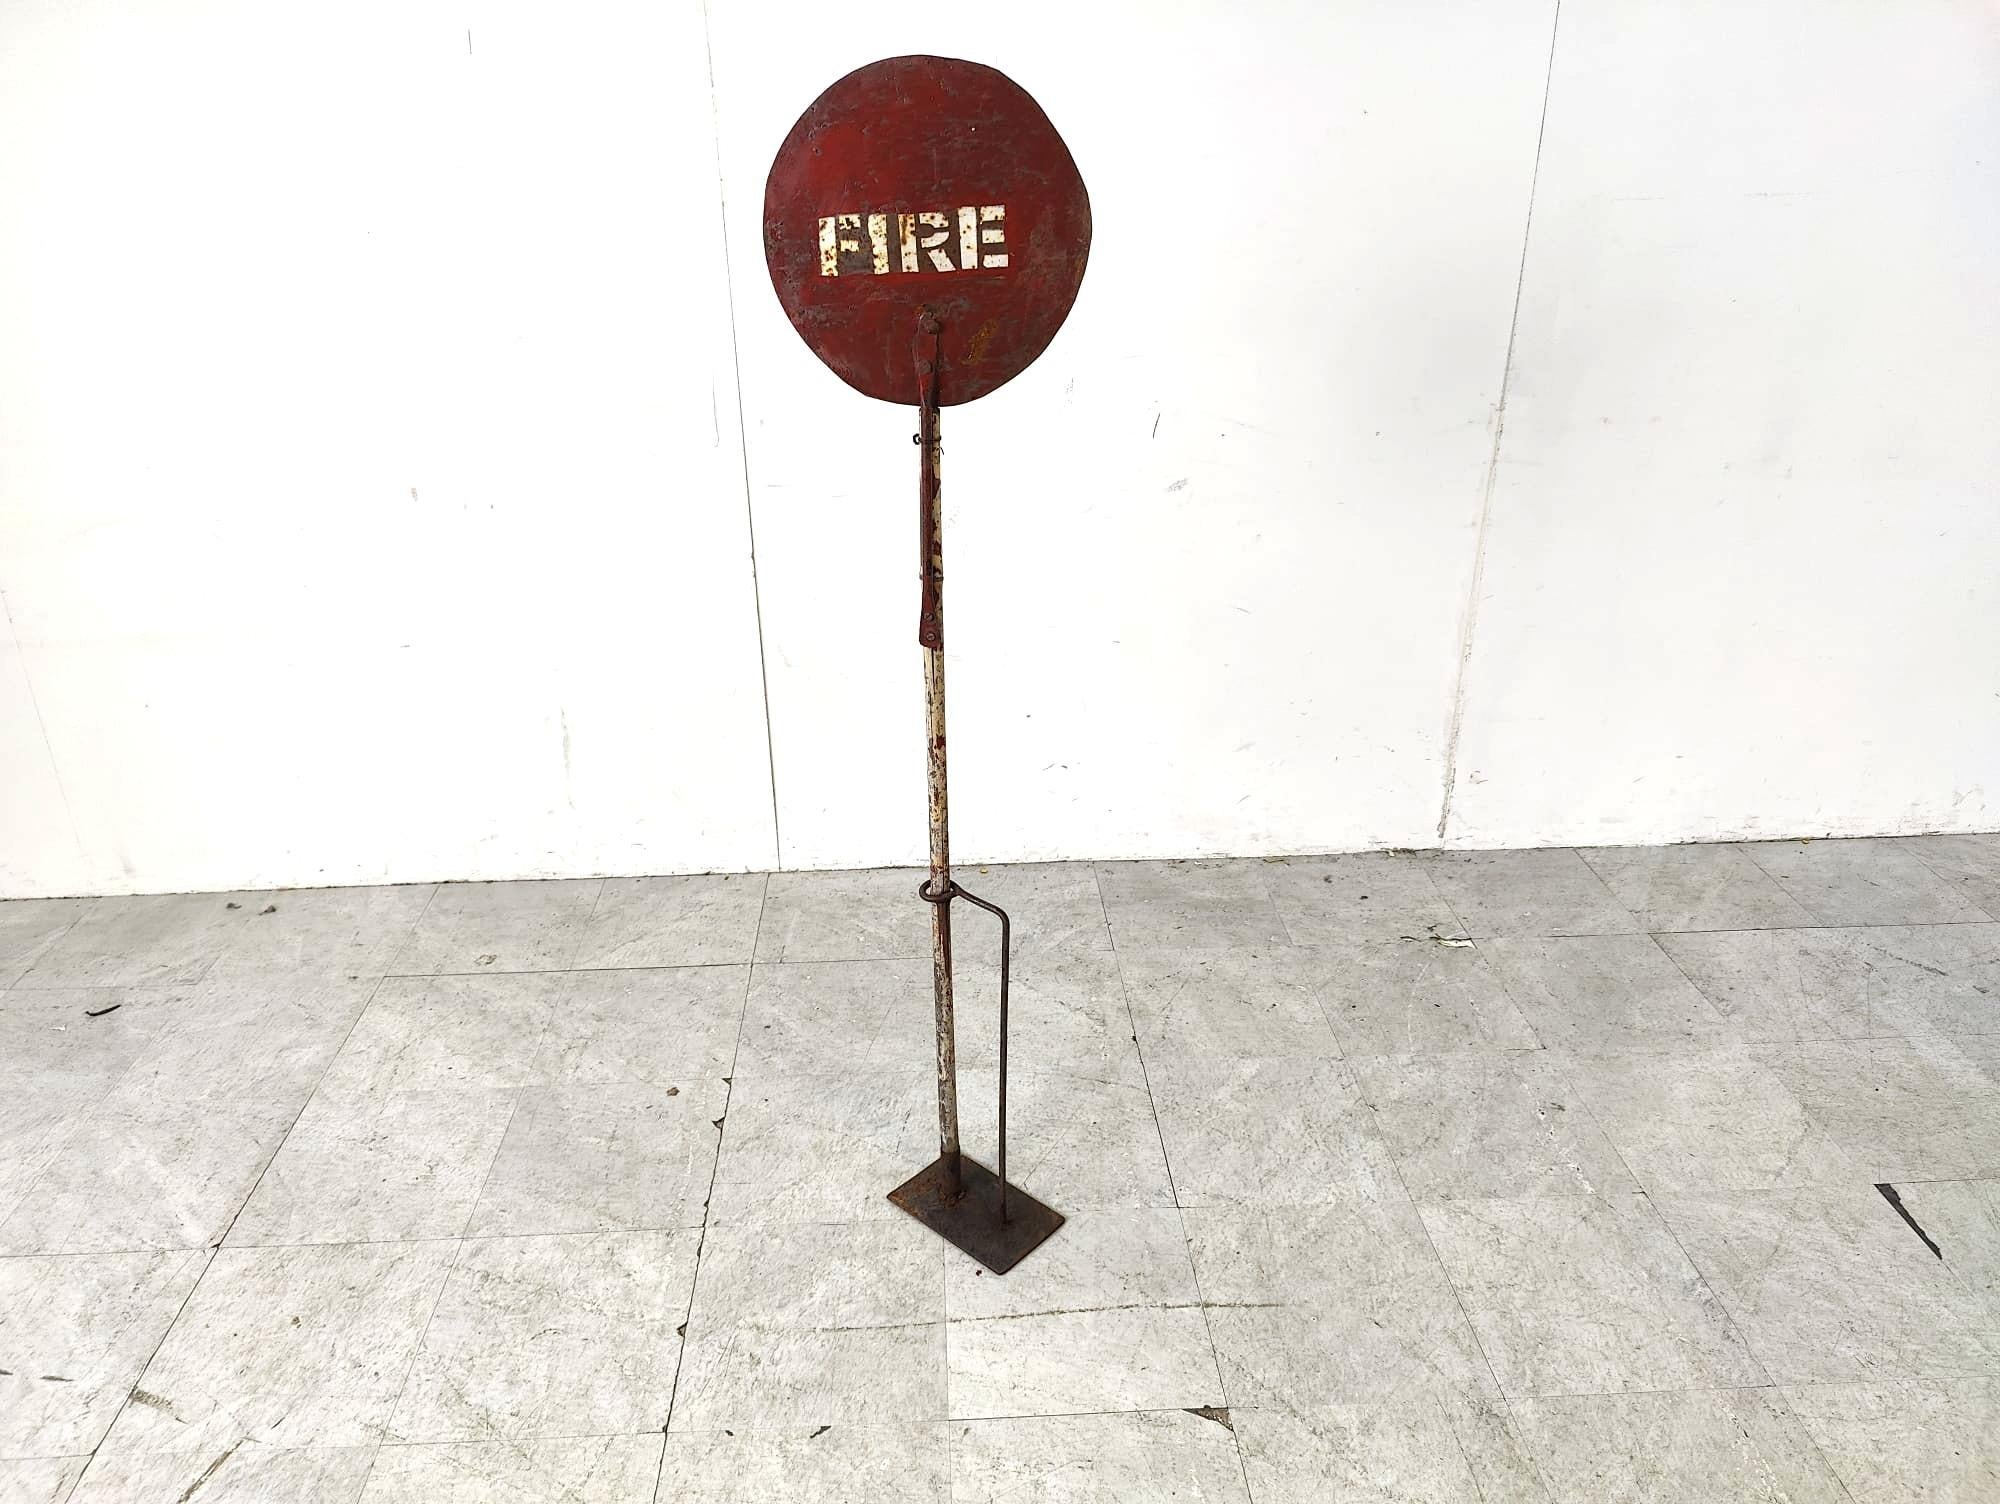 Charming vintage enamel 'FIRE' sign mlounted on a wooden and metal base.

Its unclear if this was used by the fire brigade during interventions or if this is a sign from a public building indicating an extinguisher location,...

The wear gives it a